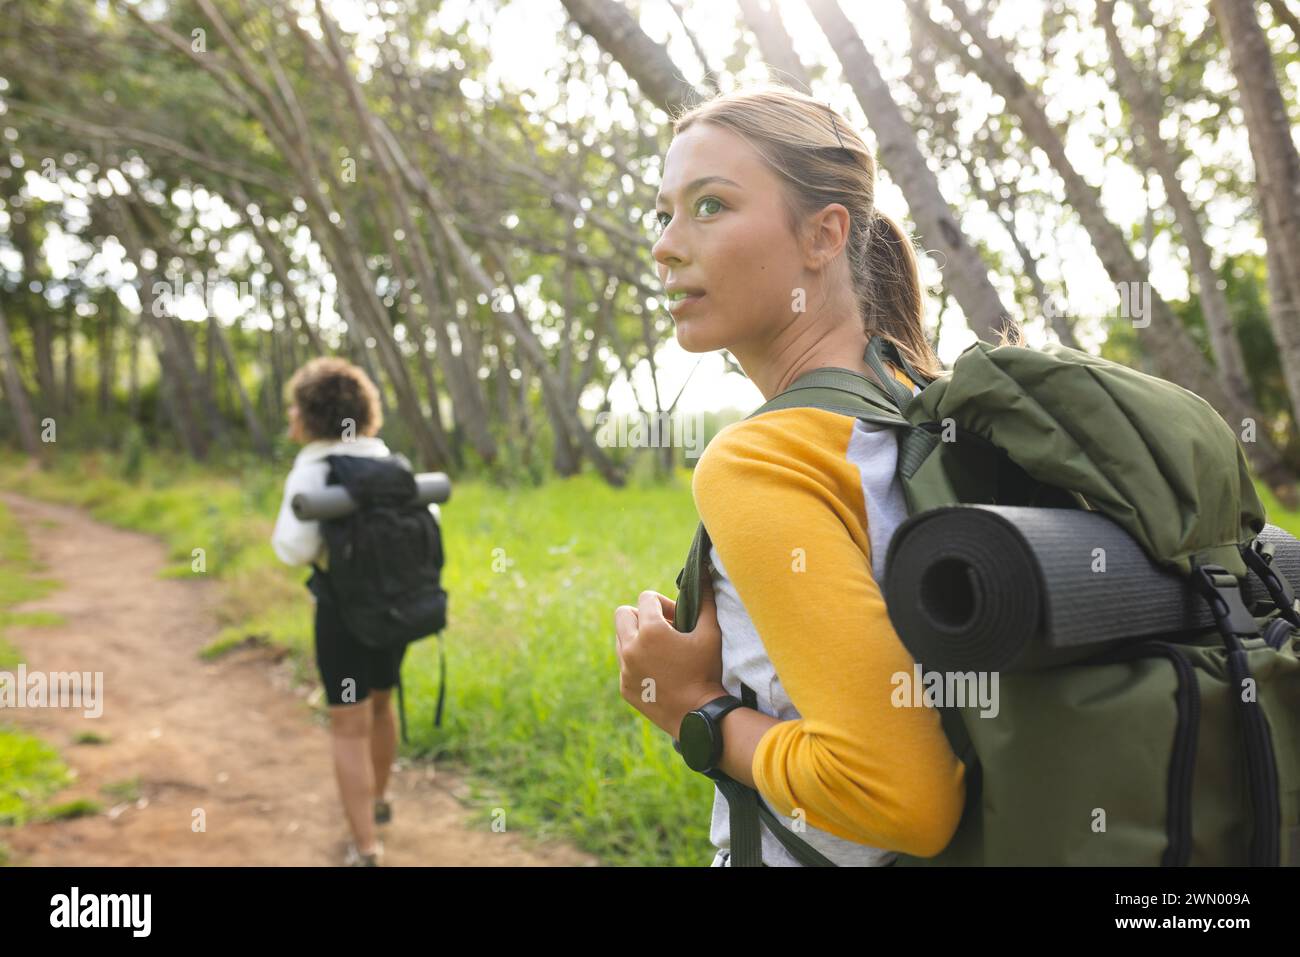 Two women, equipped for hiking, explore a tranquil forest trail together. Stock Photo